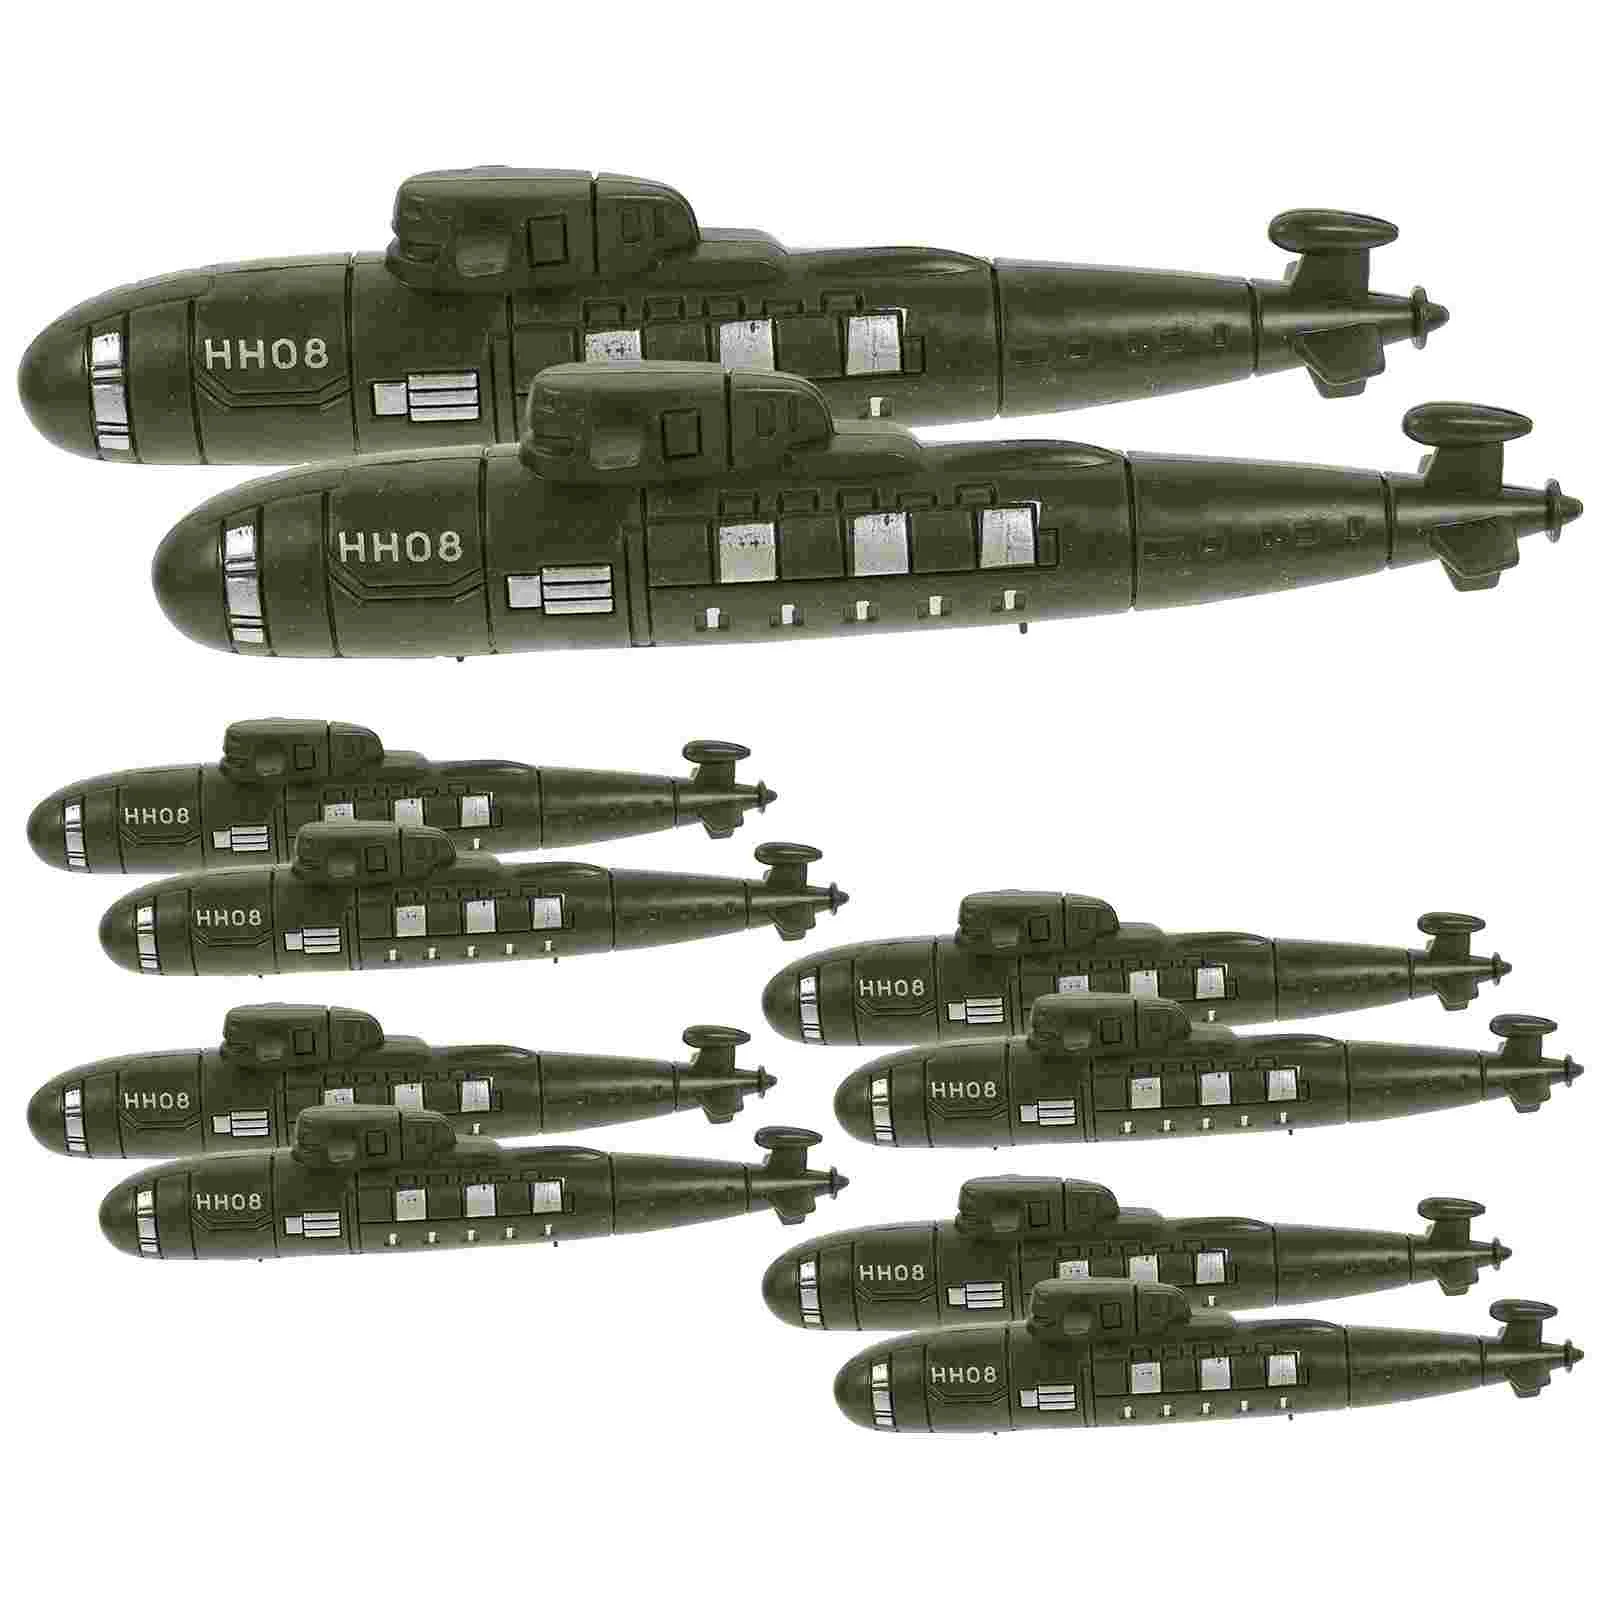 

Assorted Battleships Accessories Toy Simulated Submarine Micro Toys Small Submarines Adornment